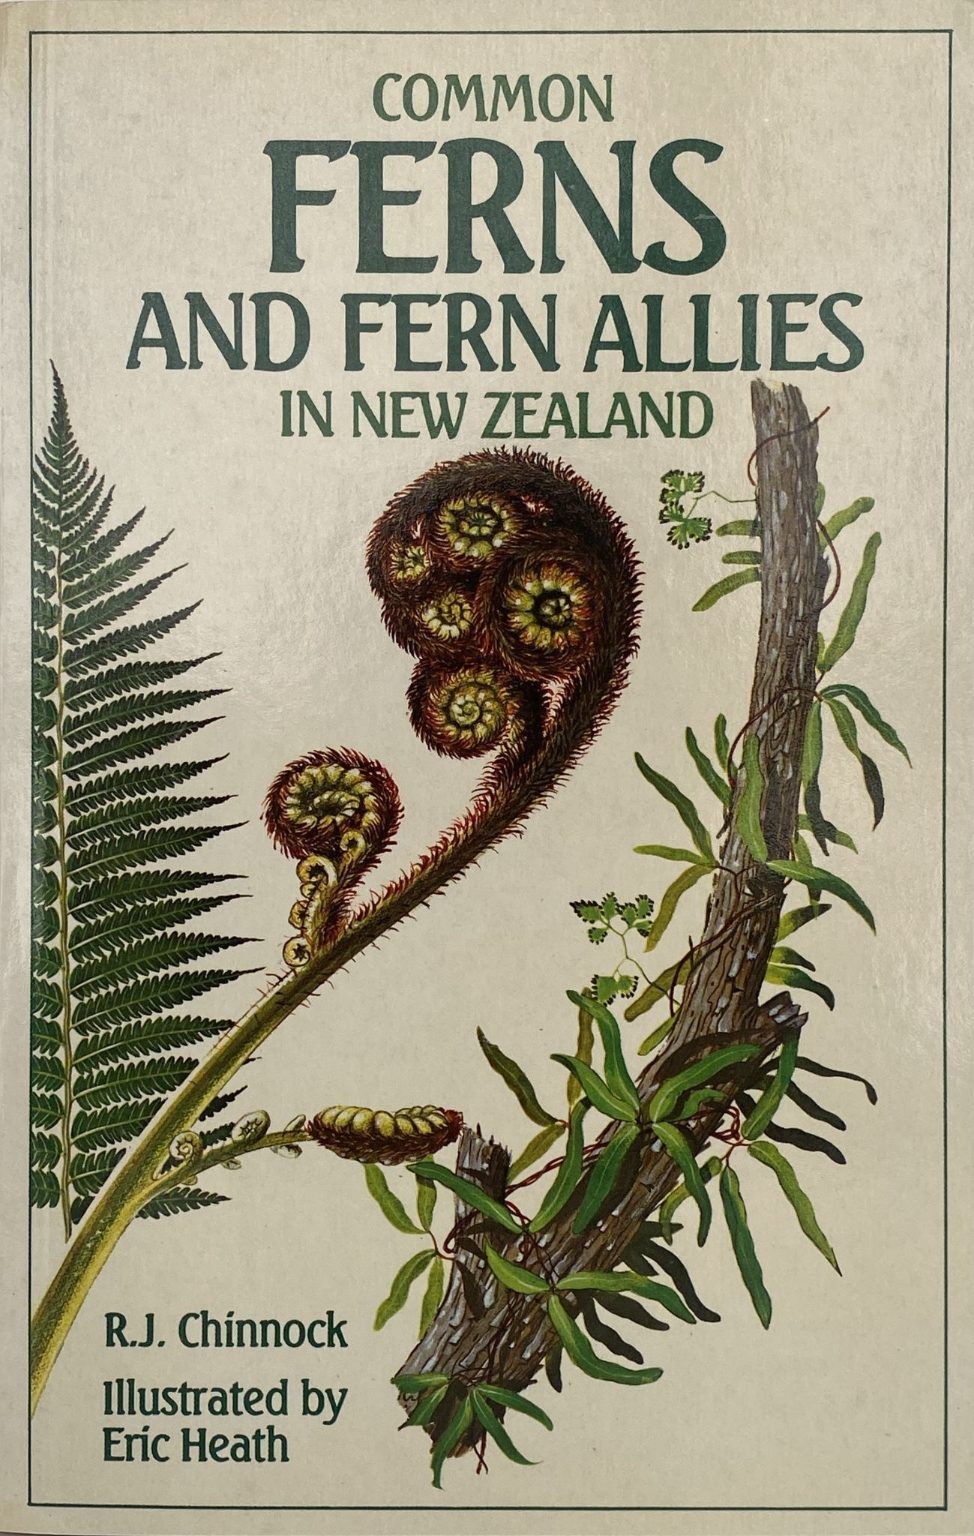 COMMON FERNS AND FERN ALLIES In New Zealand